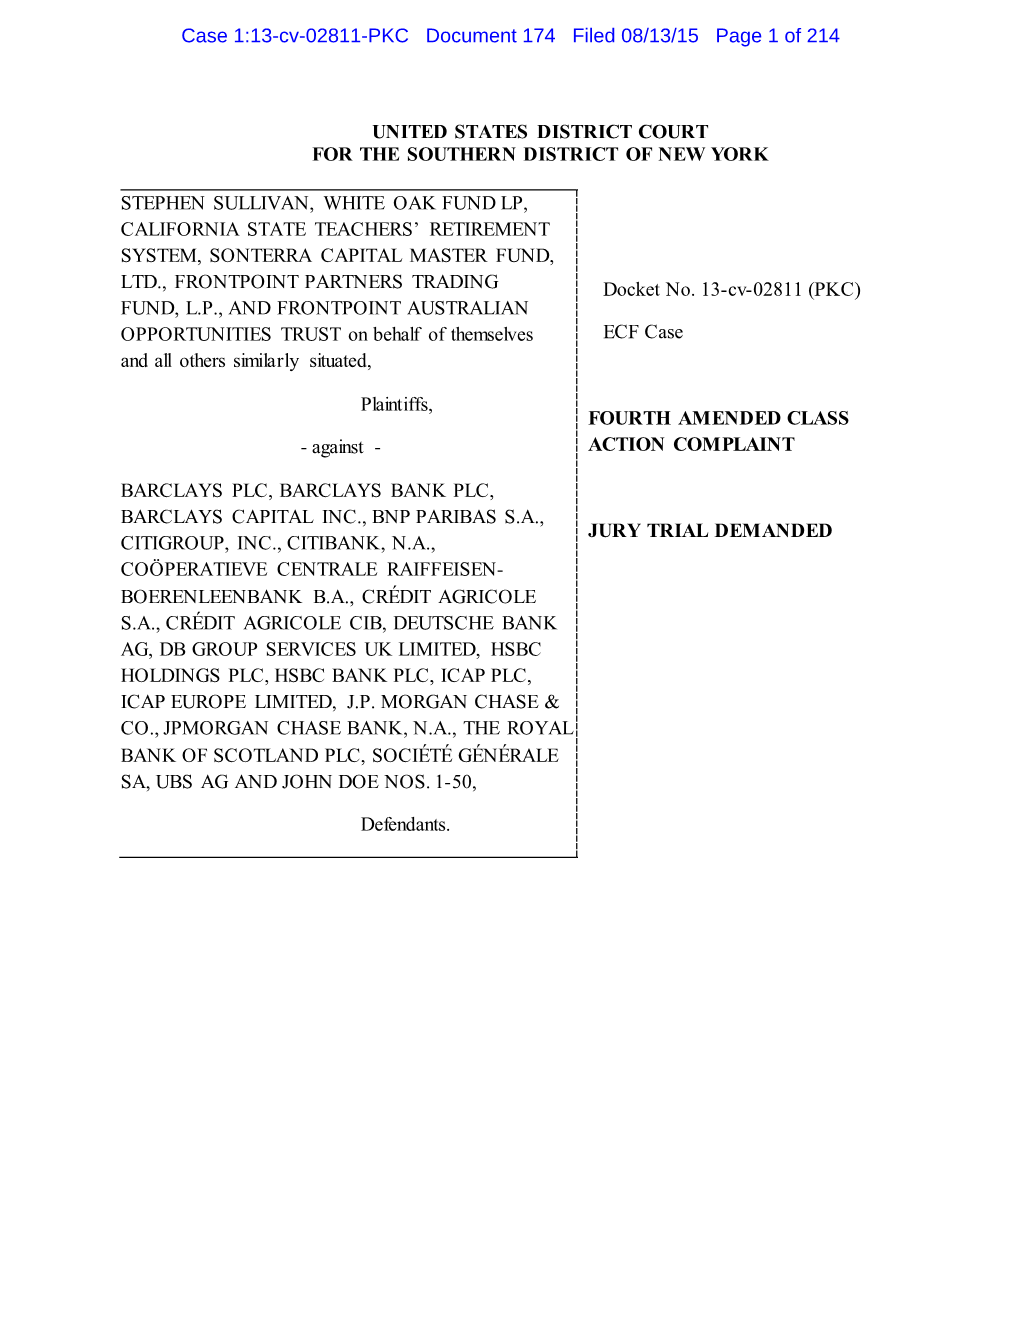 Case 1:13-Cv-02811-PKC Document 174 Filed 08/13/15 Page 1 of 214